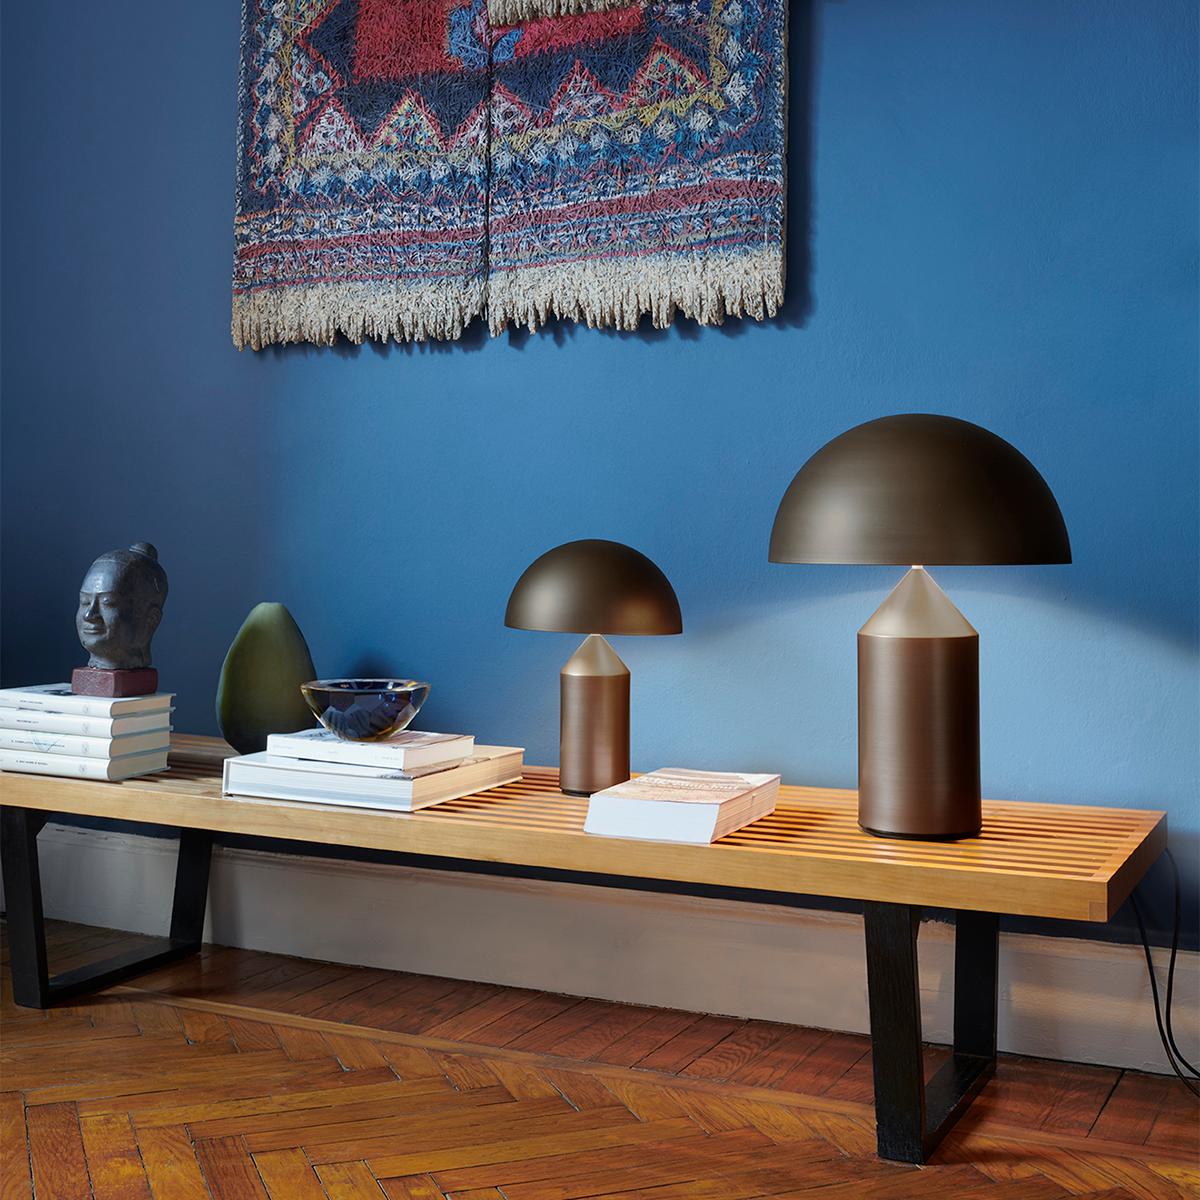 Contemporary Set of 'Atollo' Large Medium and Small Bronze Table Lamp Designed by Magistretti